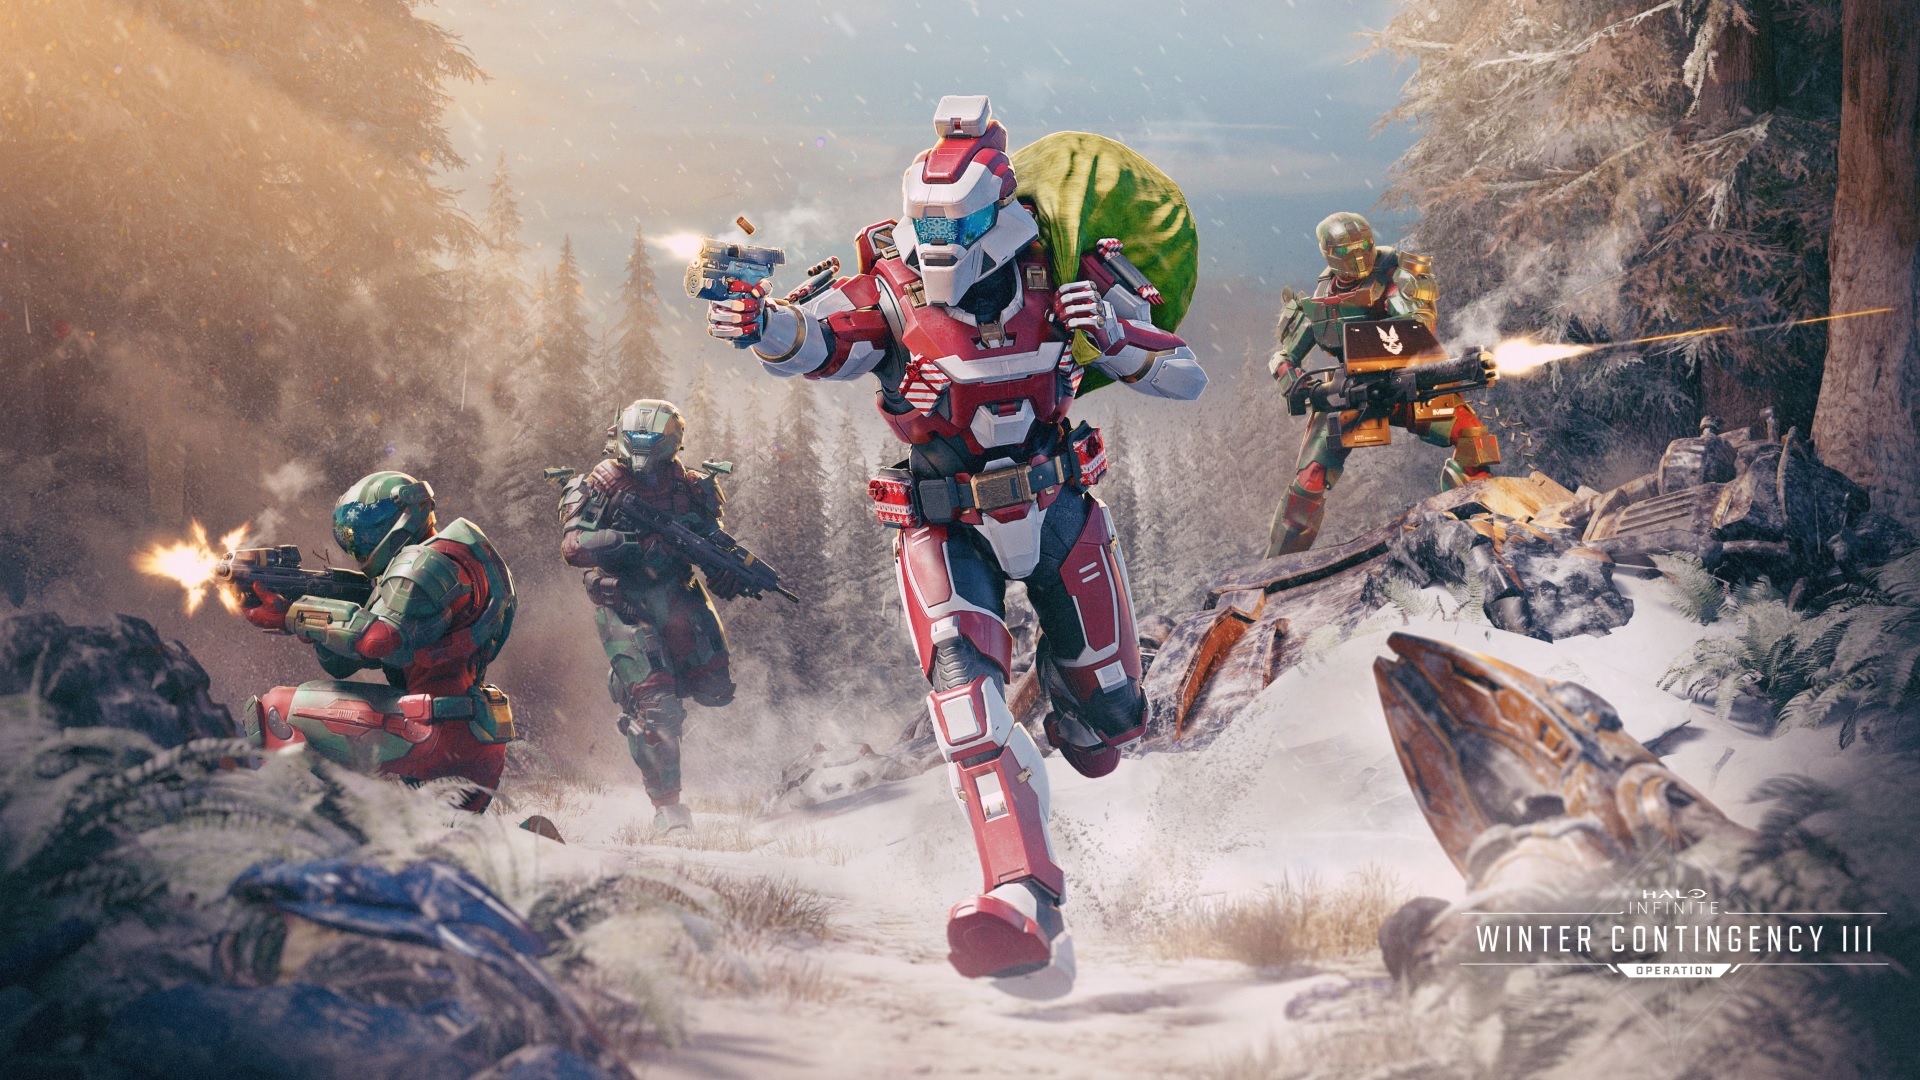 Halo Infinite key art for the Winter Contingency III Operation, showcasing four Spartans in the snow with the central one clad in Santa-inspired armor holding a green sack over their back